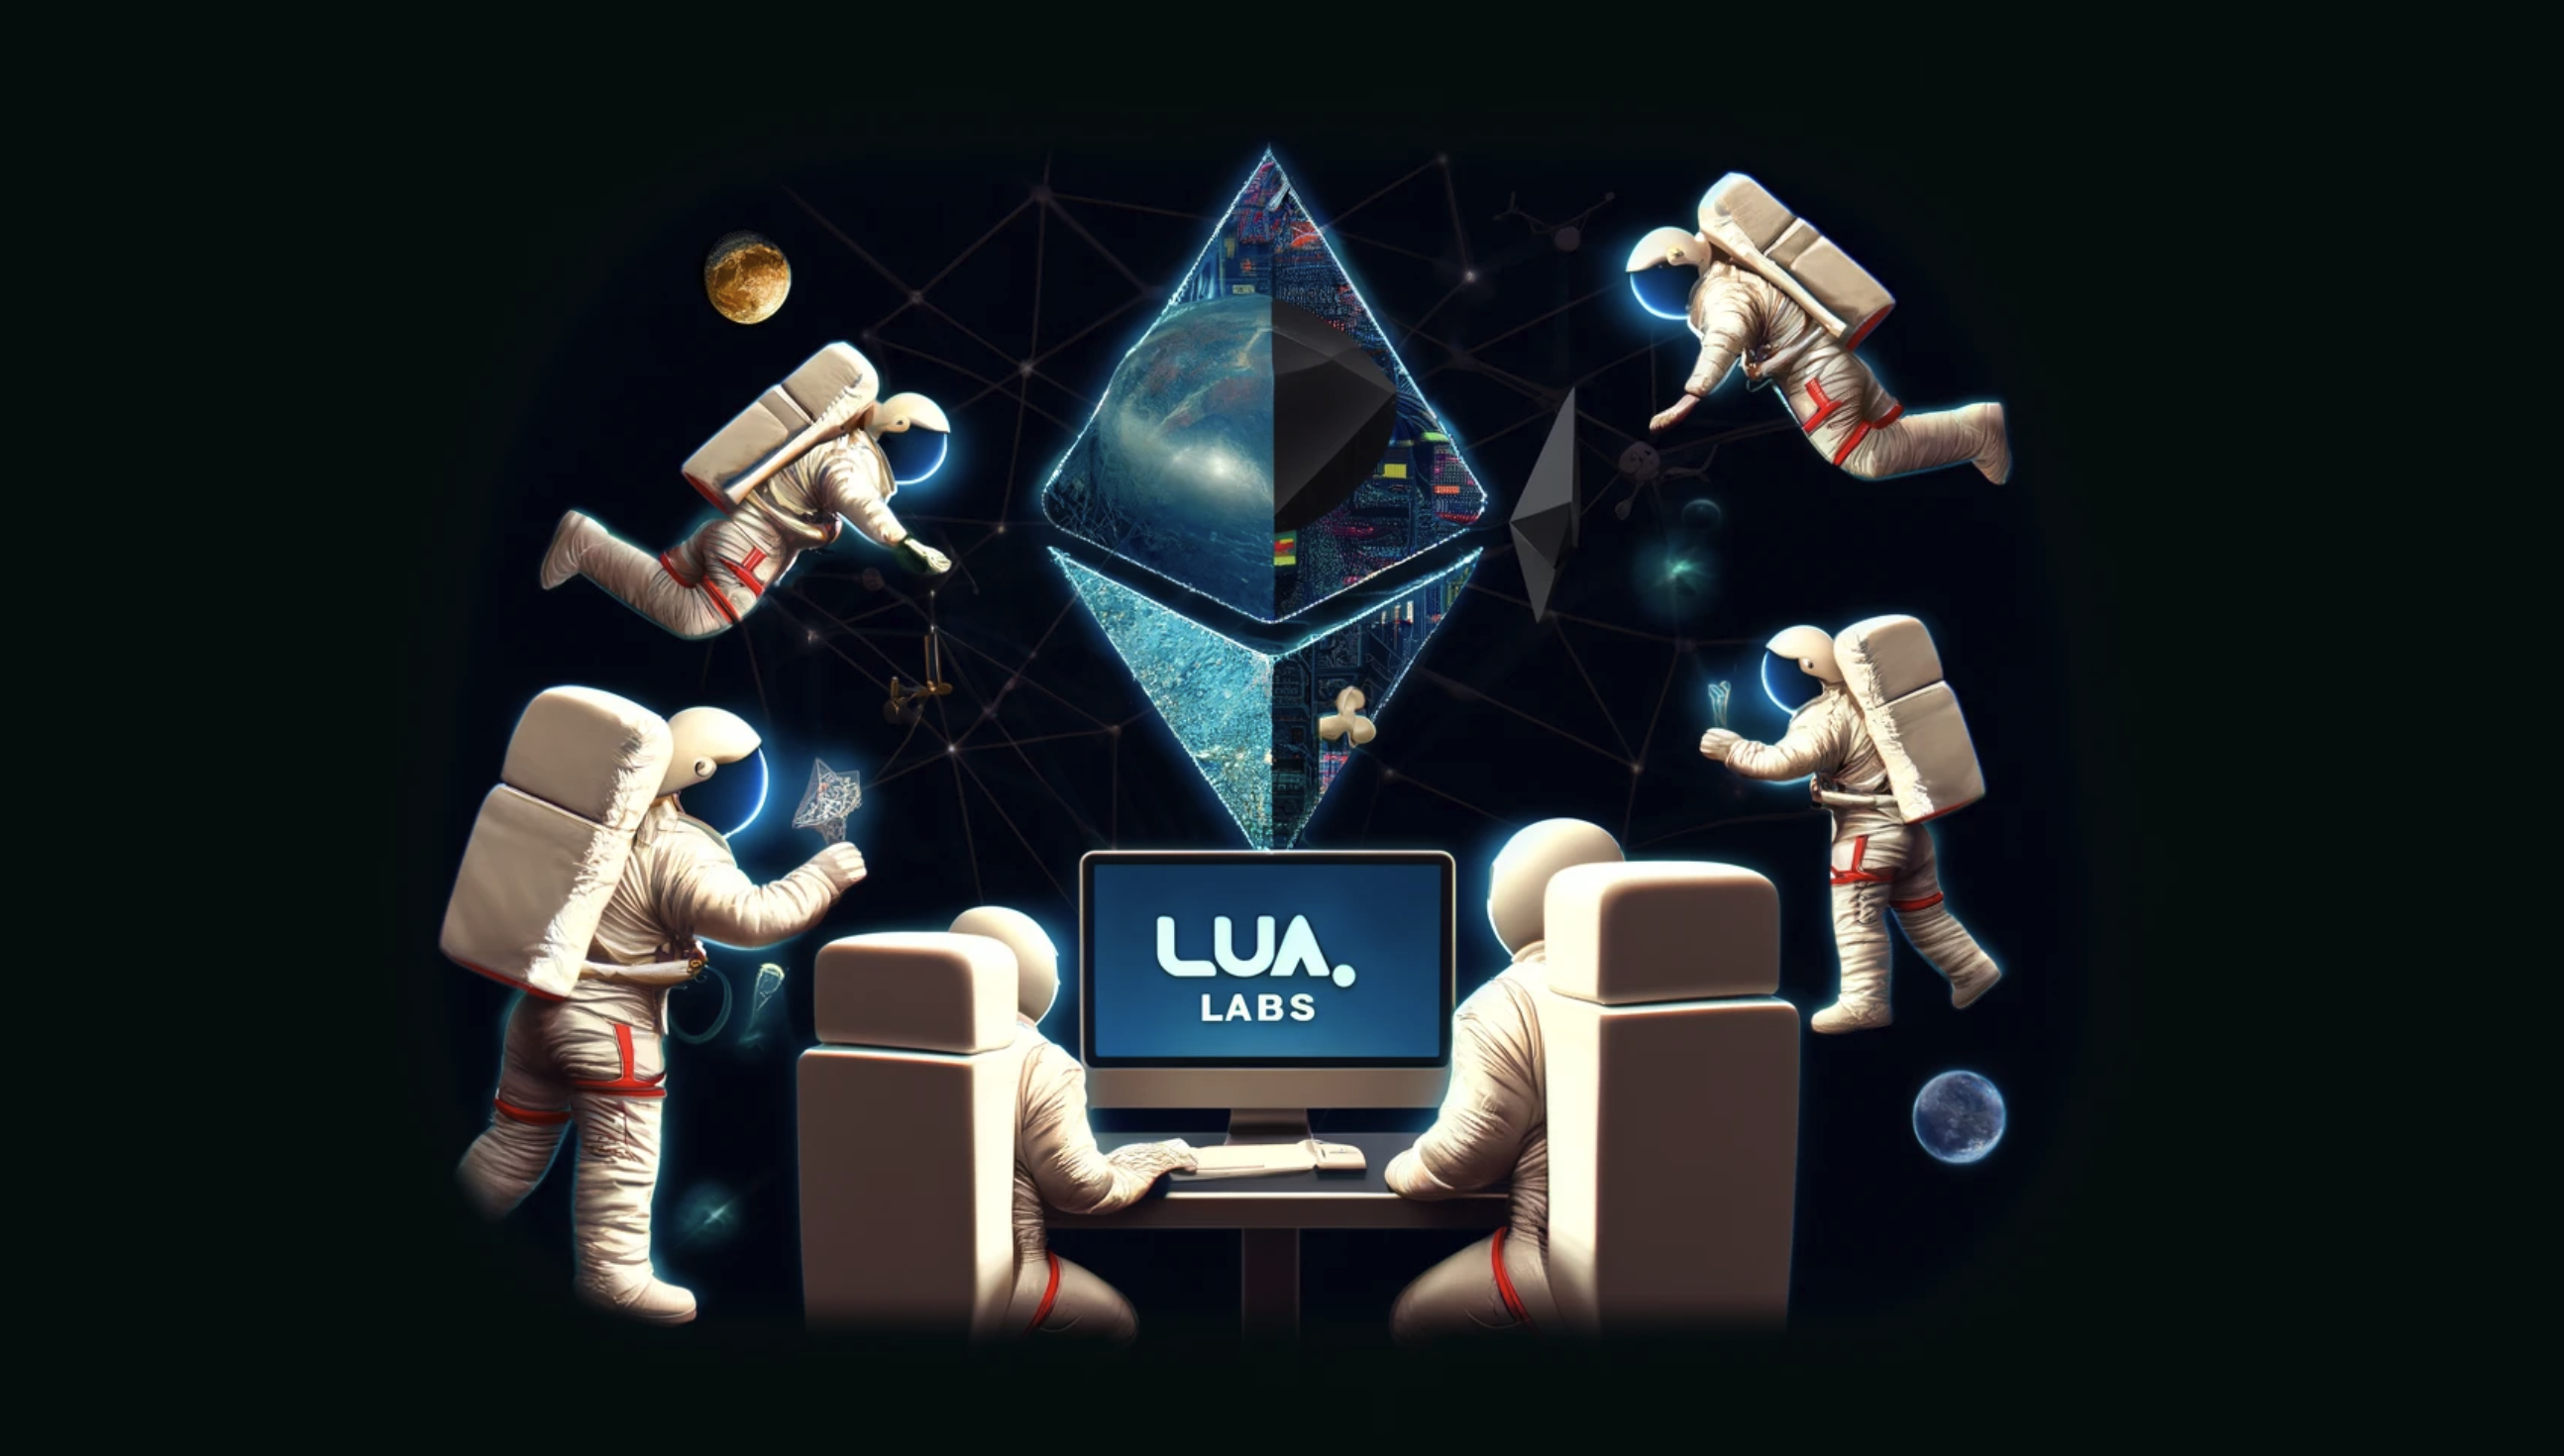 Picture of the lua labs team together